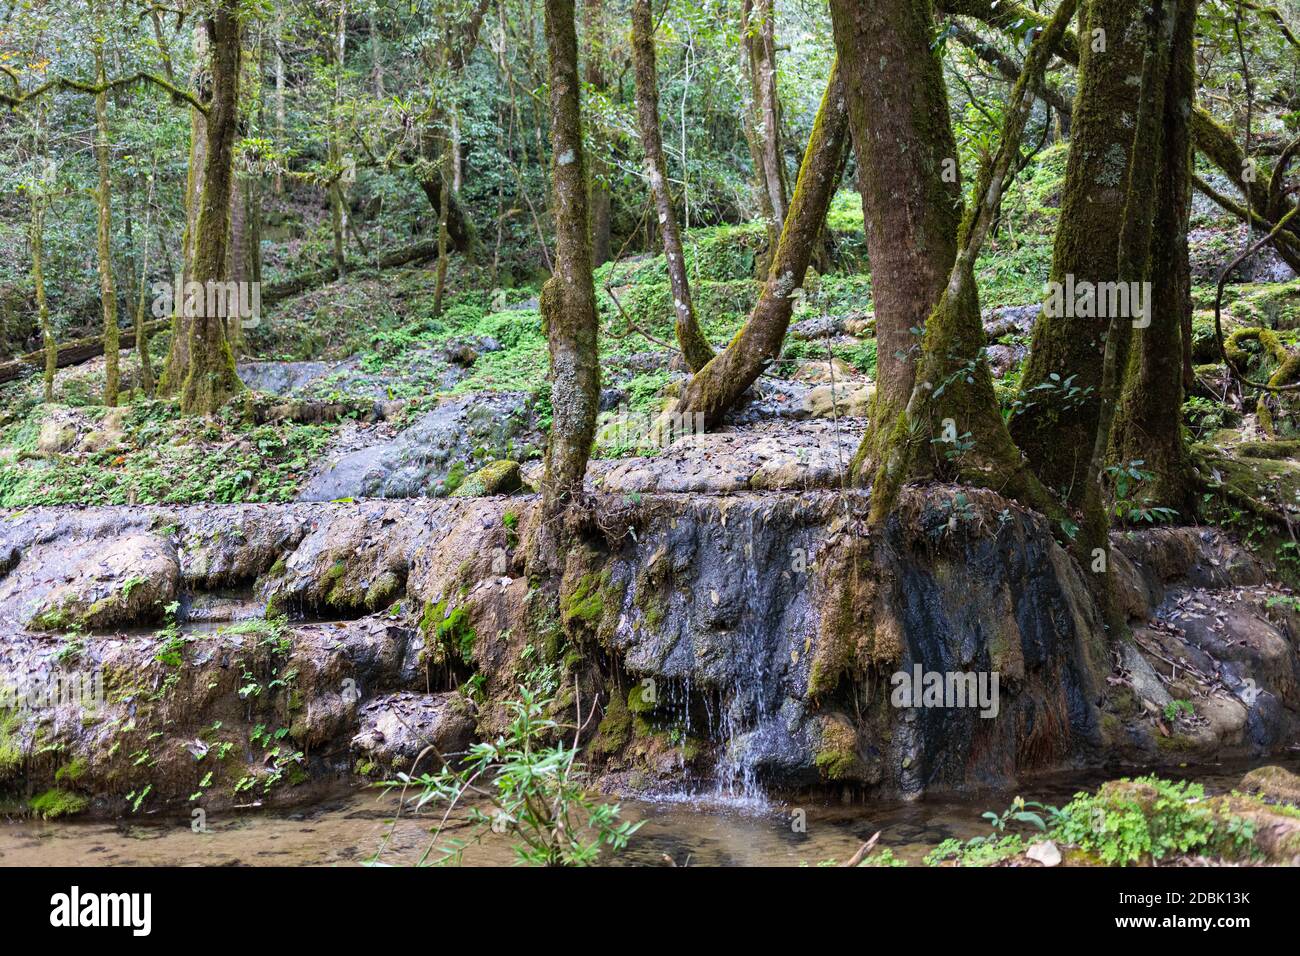 Waterfall in the forrest in the Park known as El Cielo, in the Mexican State of Tamaulipas Stock Photo